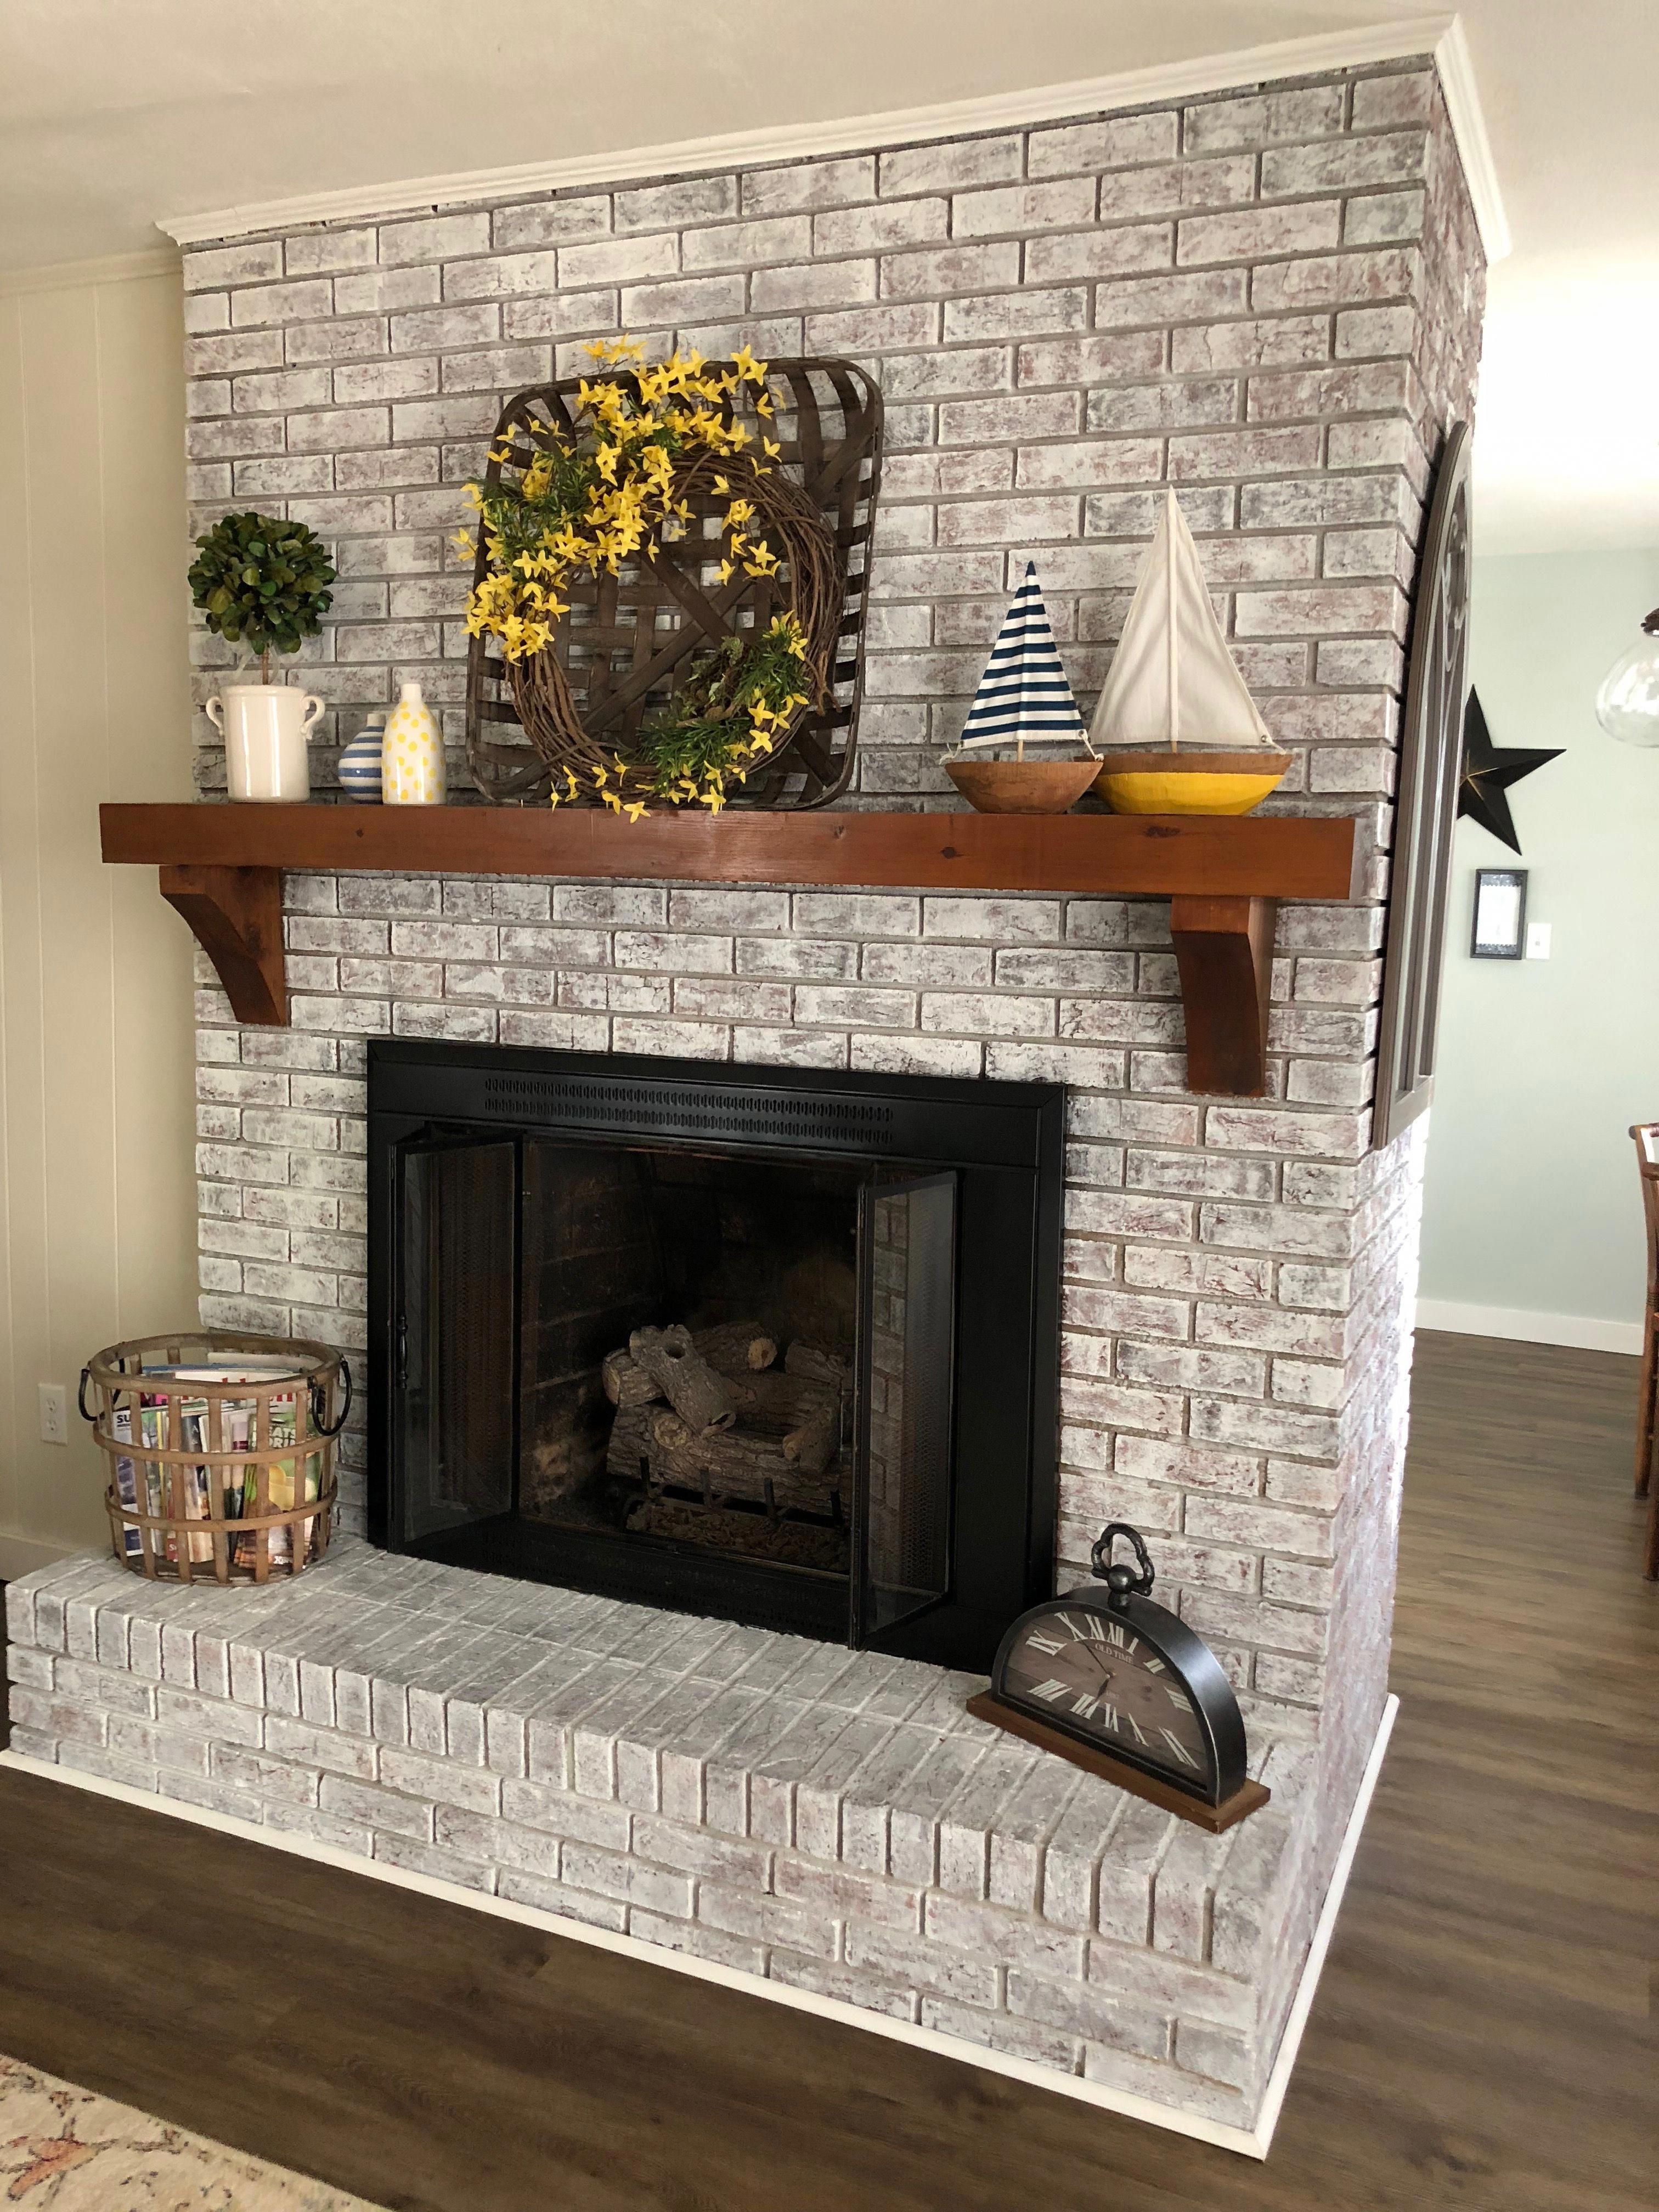 Paint Fireplace Hearth Inspirational Painted Brick Fireplace Sw Pure White Over Dark Red Brick